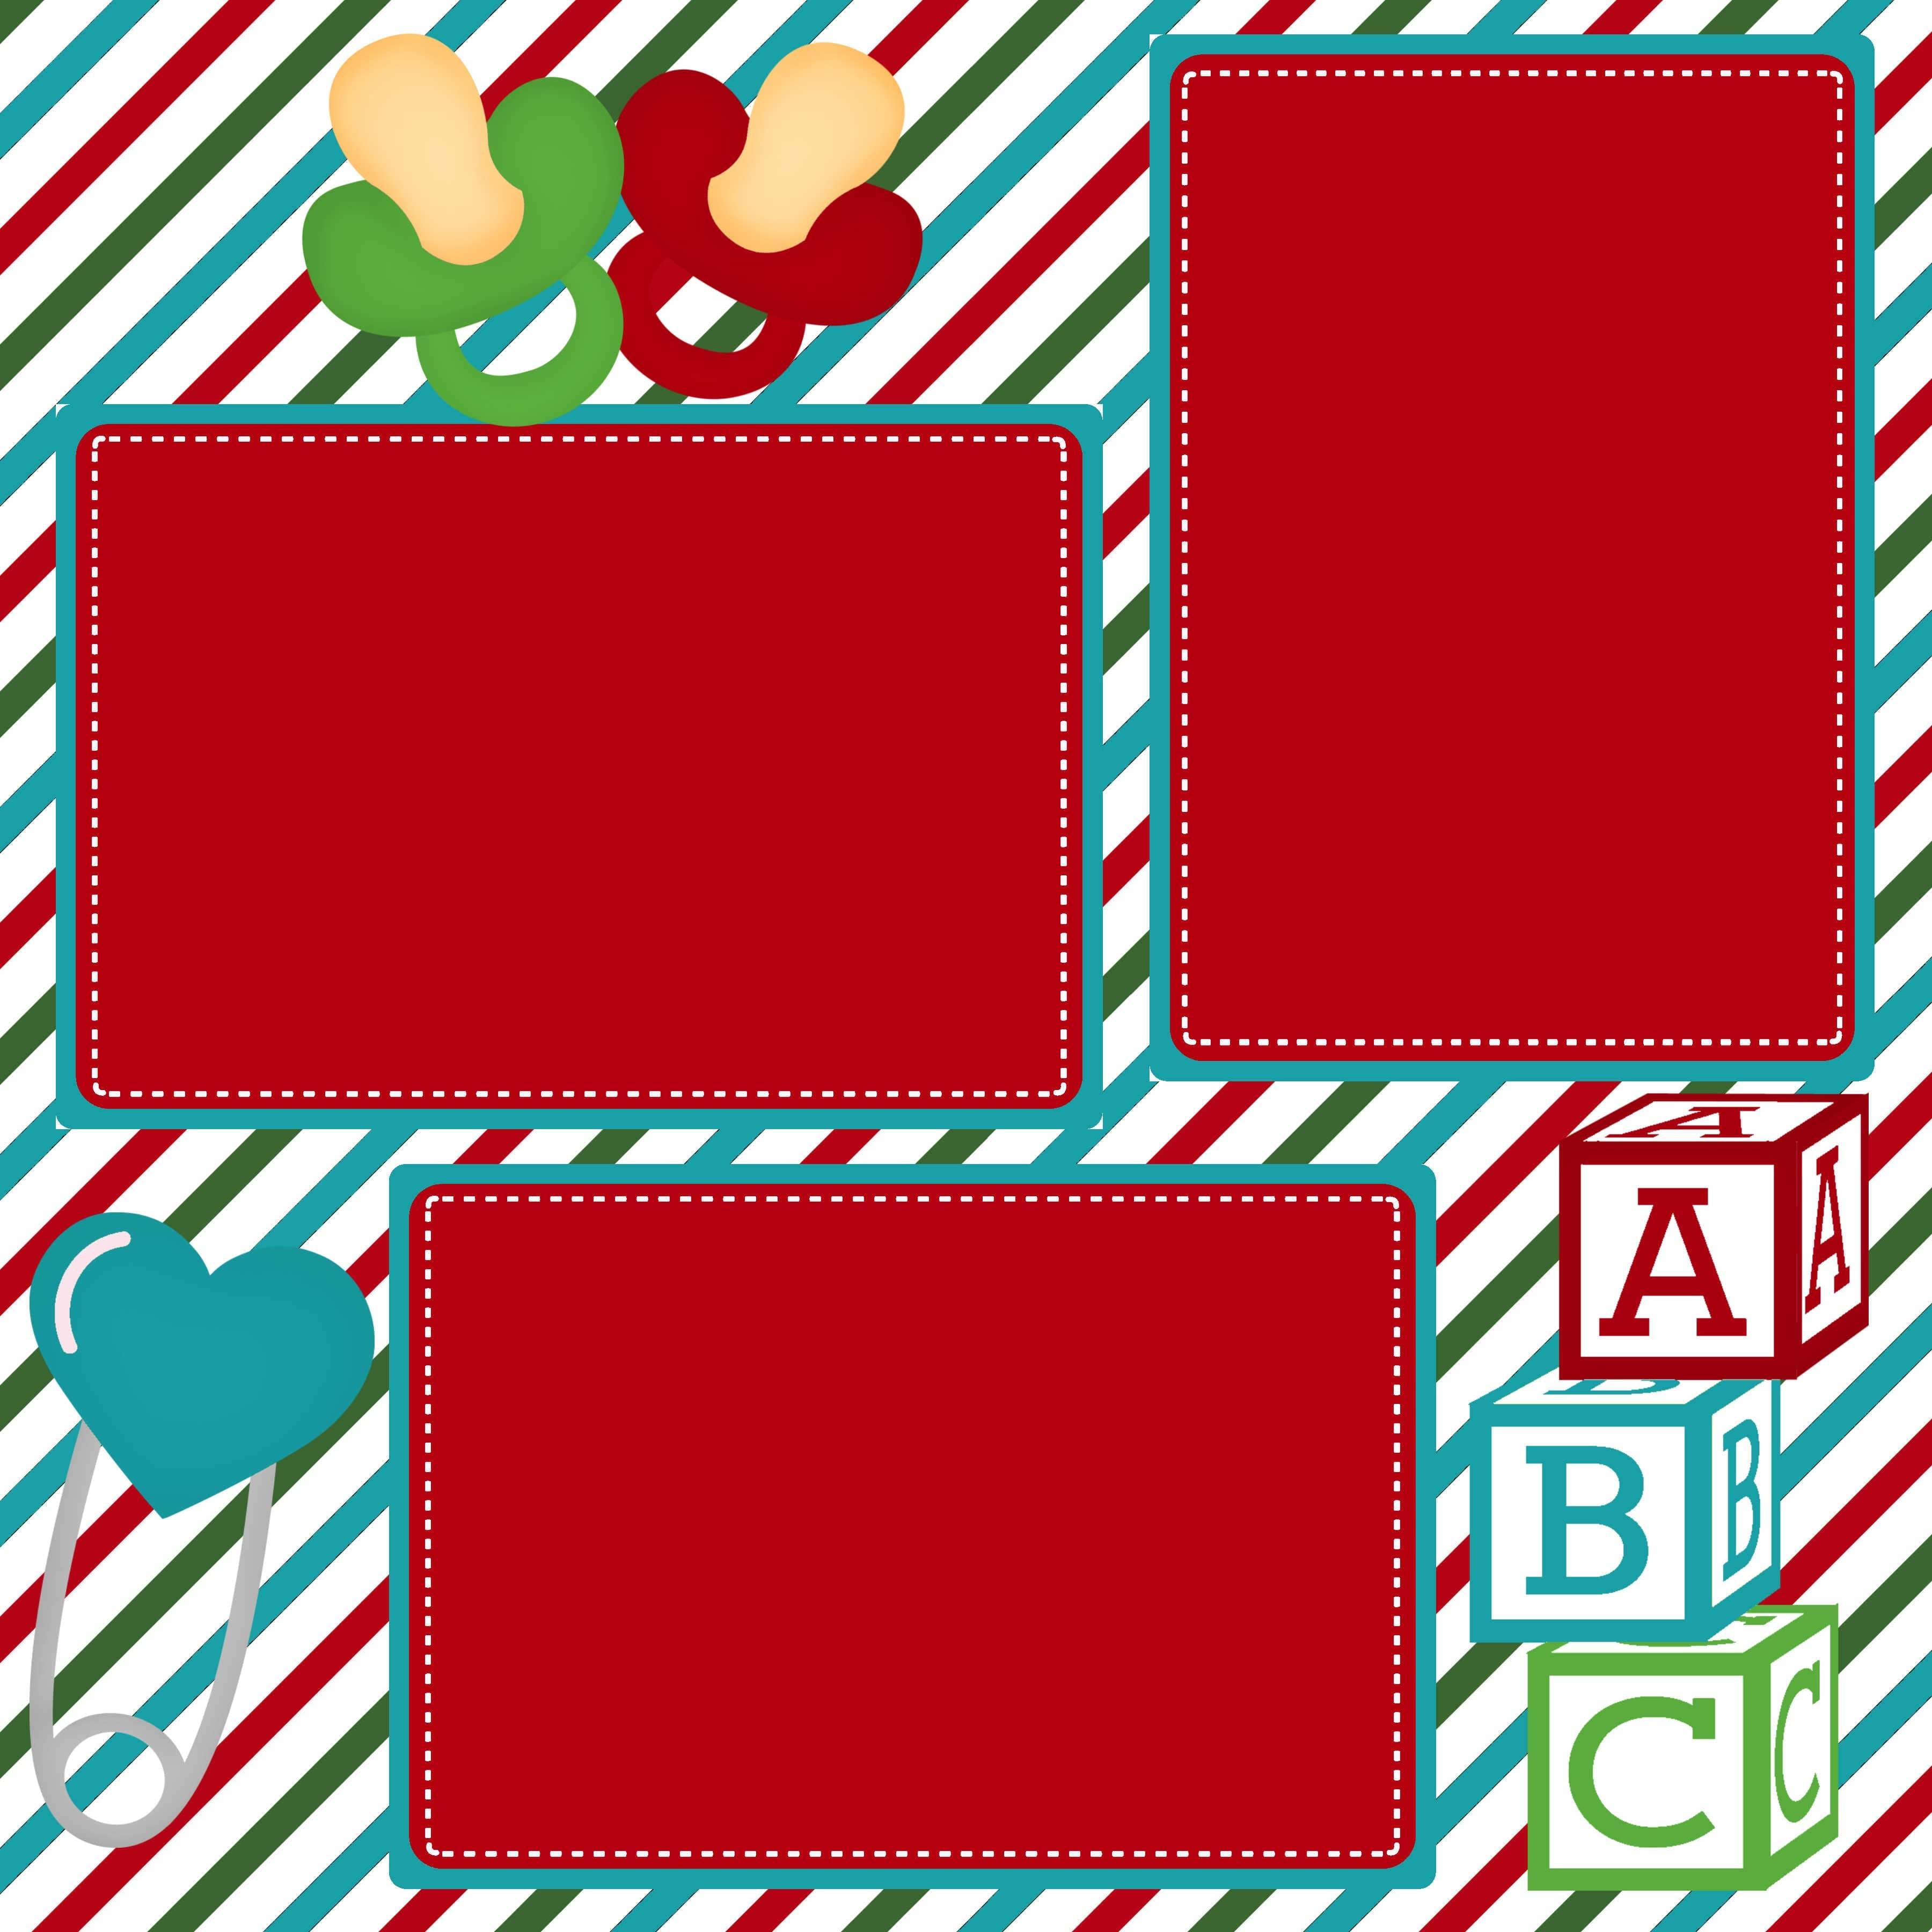 My First Christmas (2) - 12 x 12 Premade, Printed Scrapbook Pages by SSC Designs - Scrapbook Supply Companies